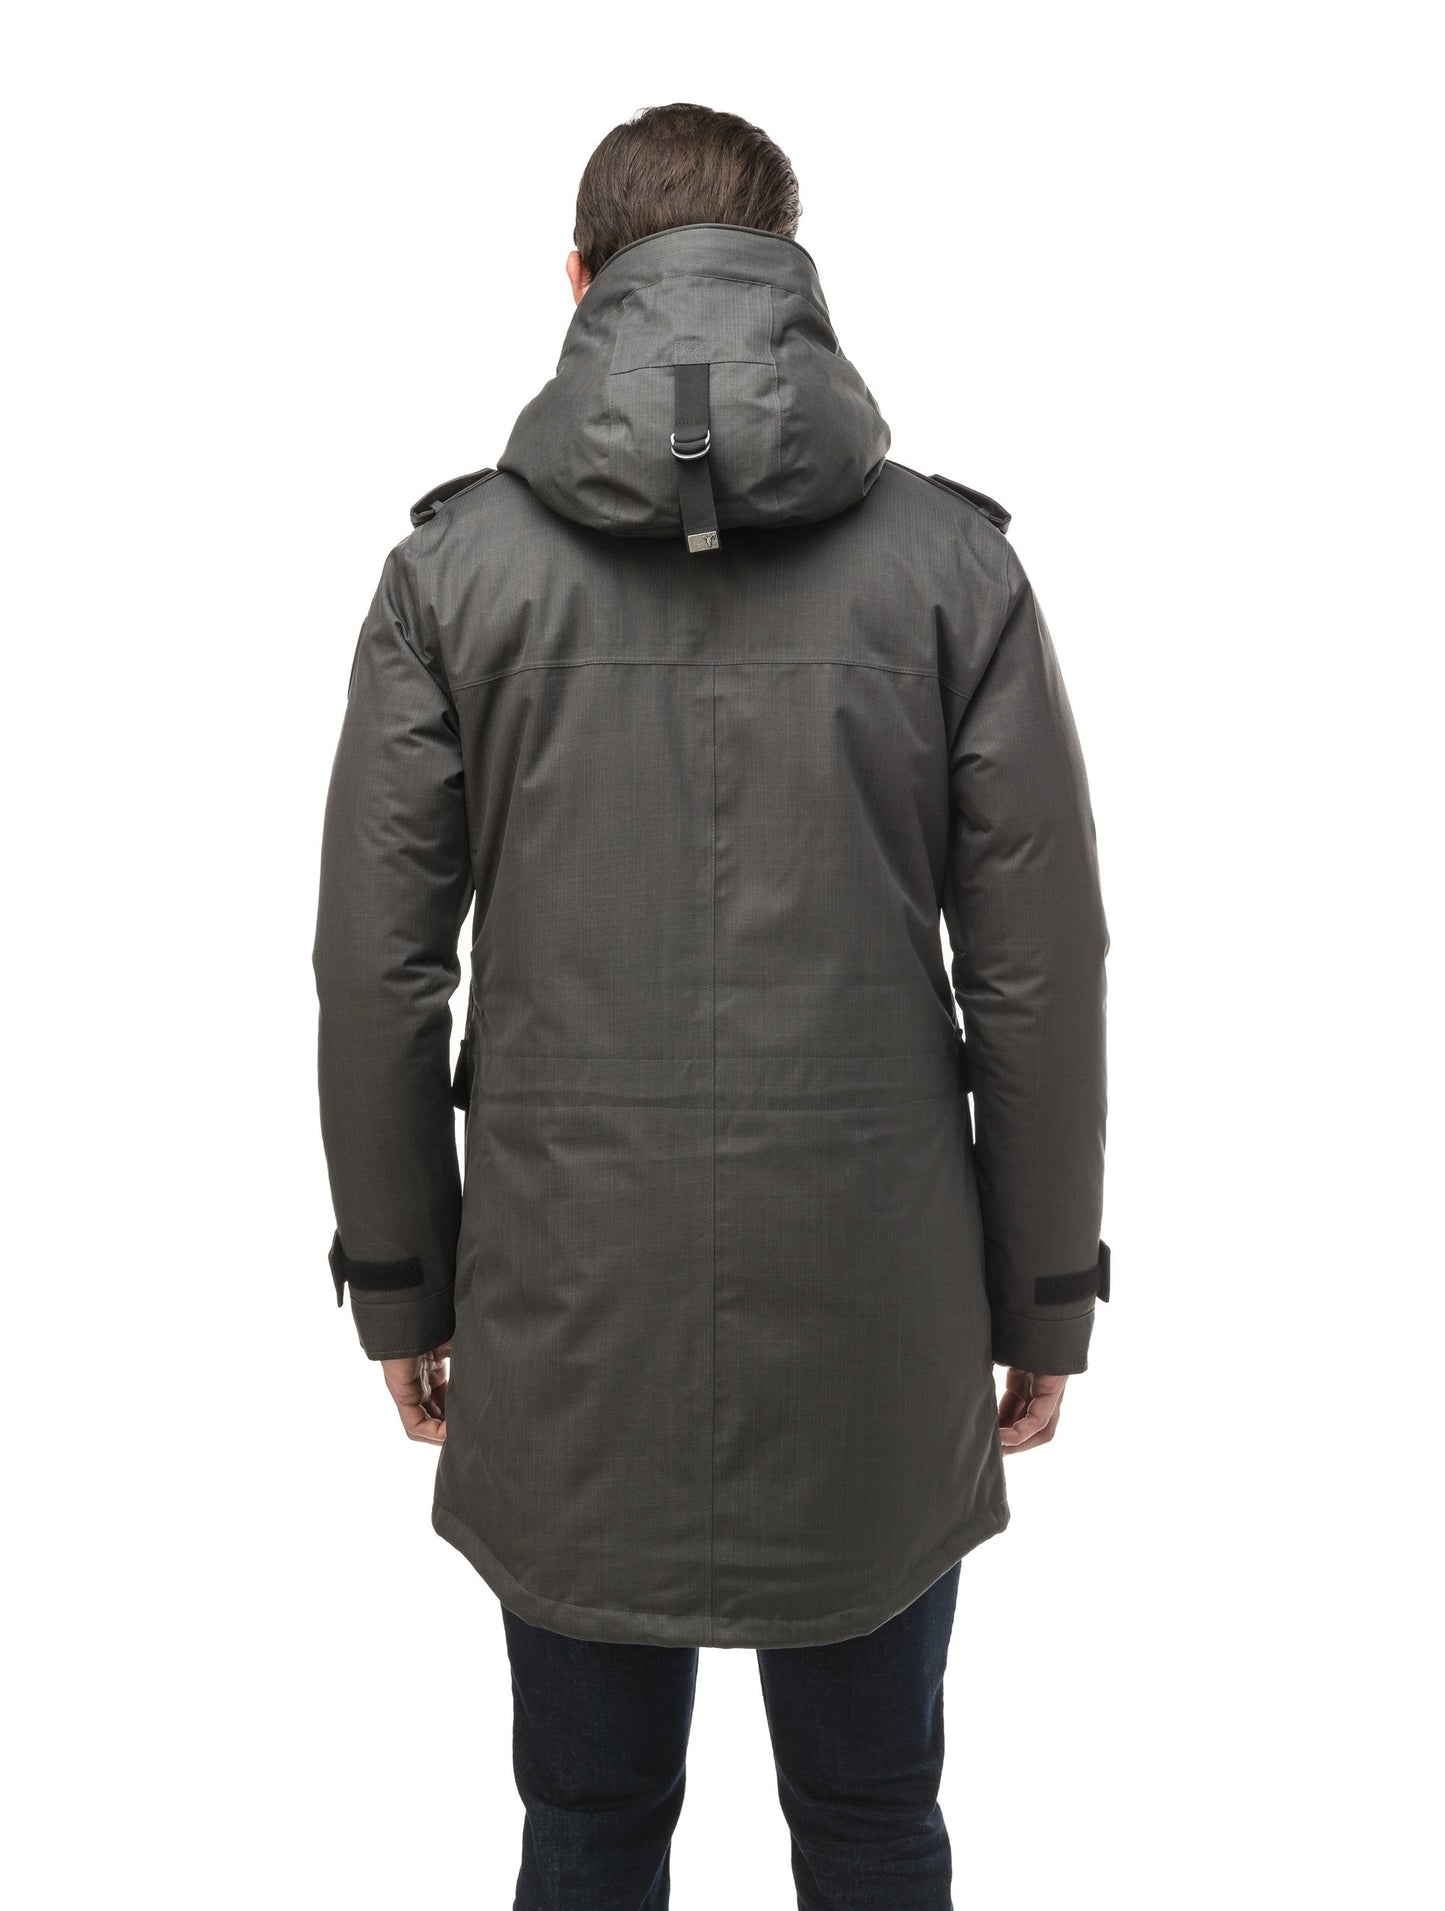 Men's down filled parka with faux button magnet closures and fur free hood with a fishtail hemline in Steel Grey